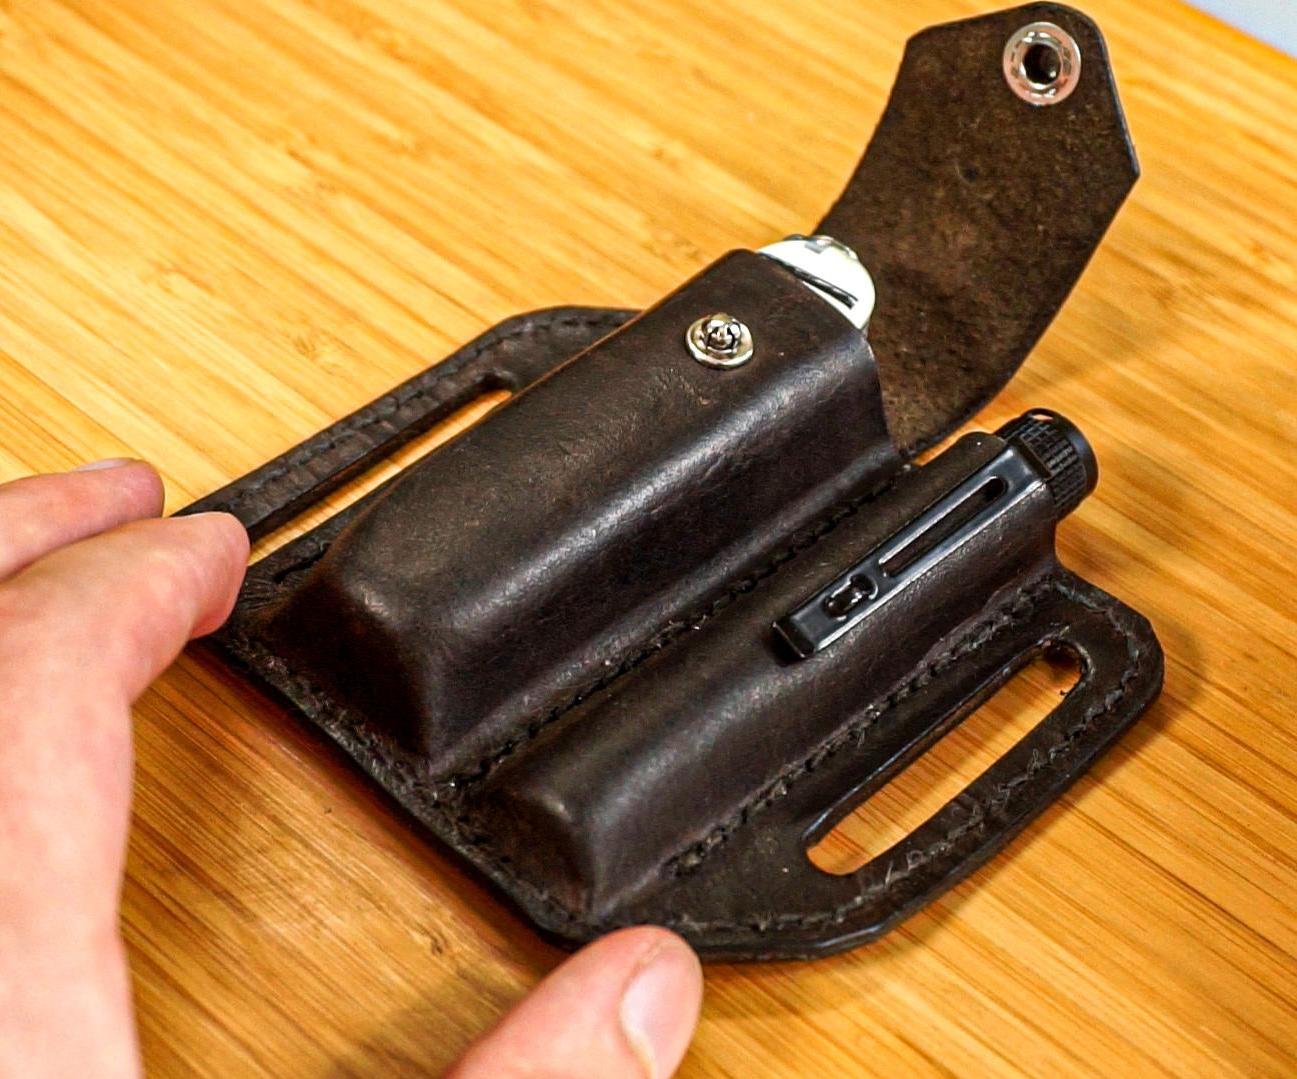 Wet Molded EDC Leather Sheath for a Swiss Army Knife and a Flashlight